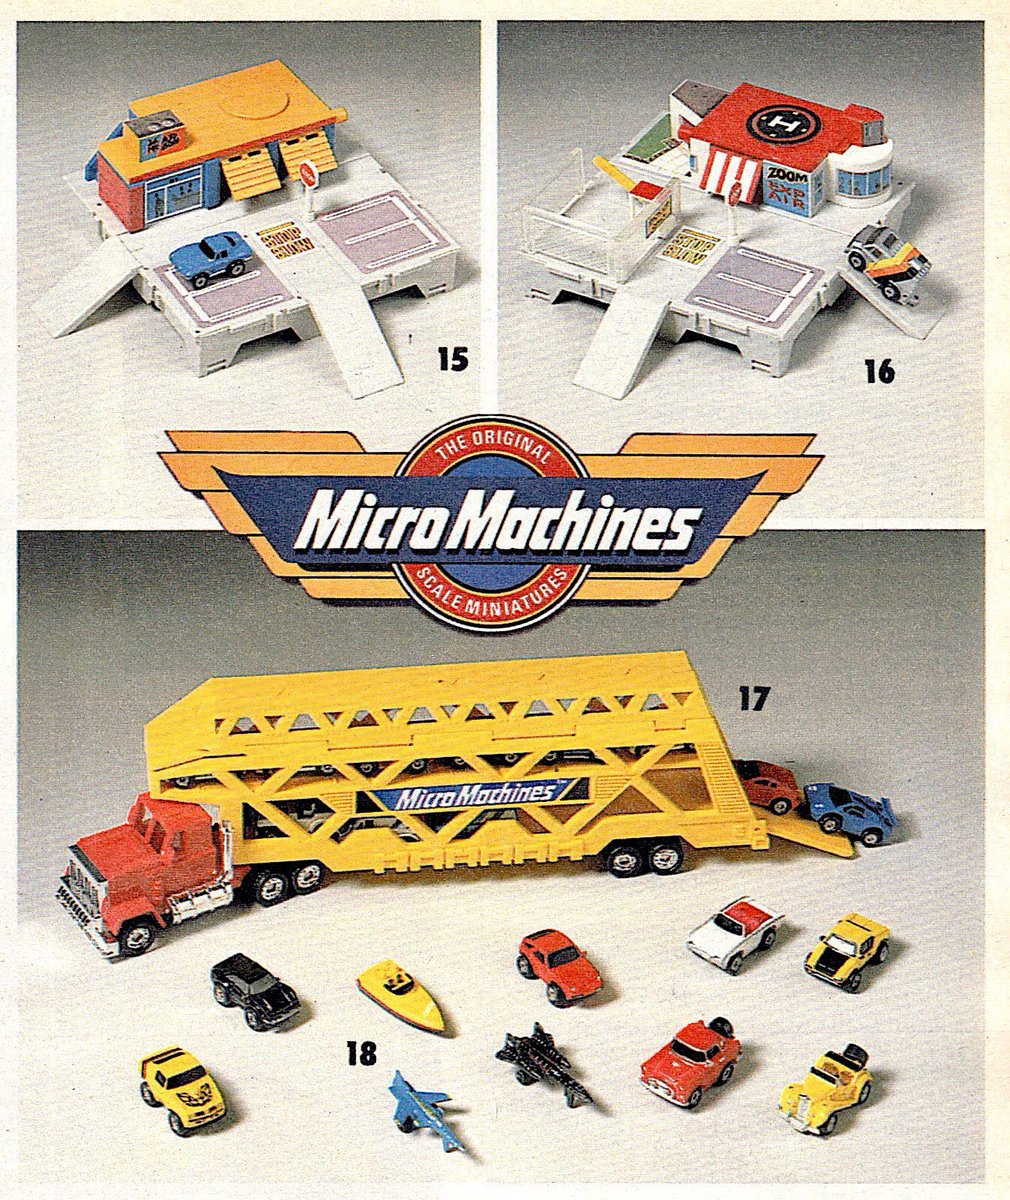 In 1987, Galoob toy company introduced Micro Machines miniature cars and playsets